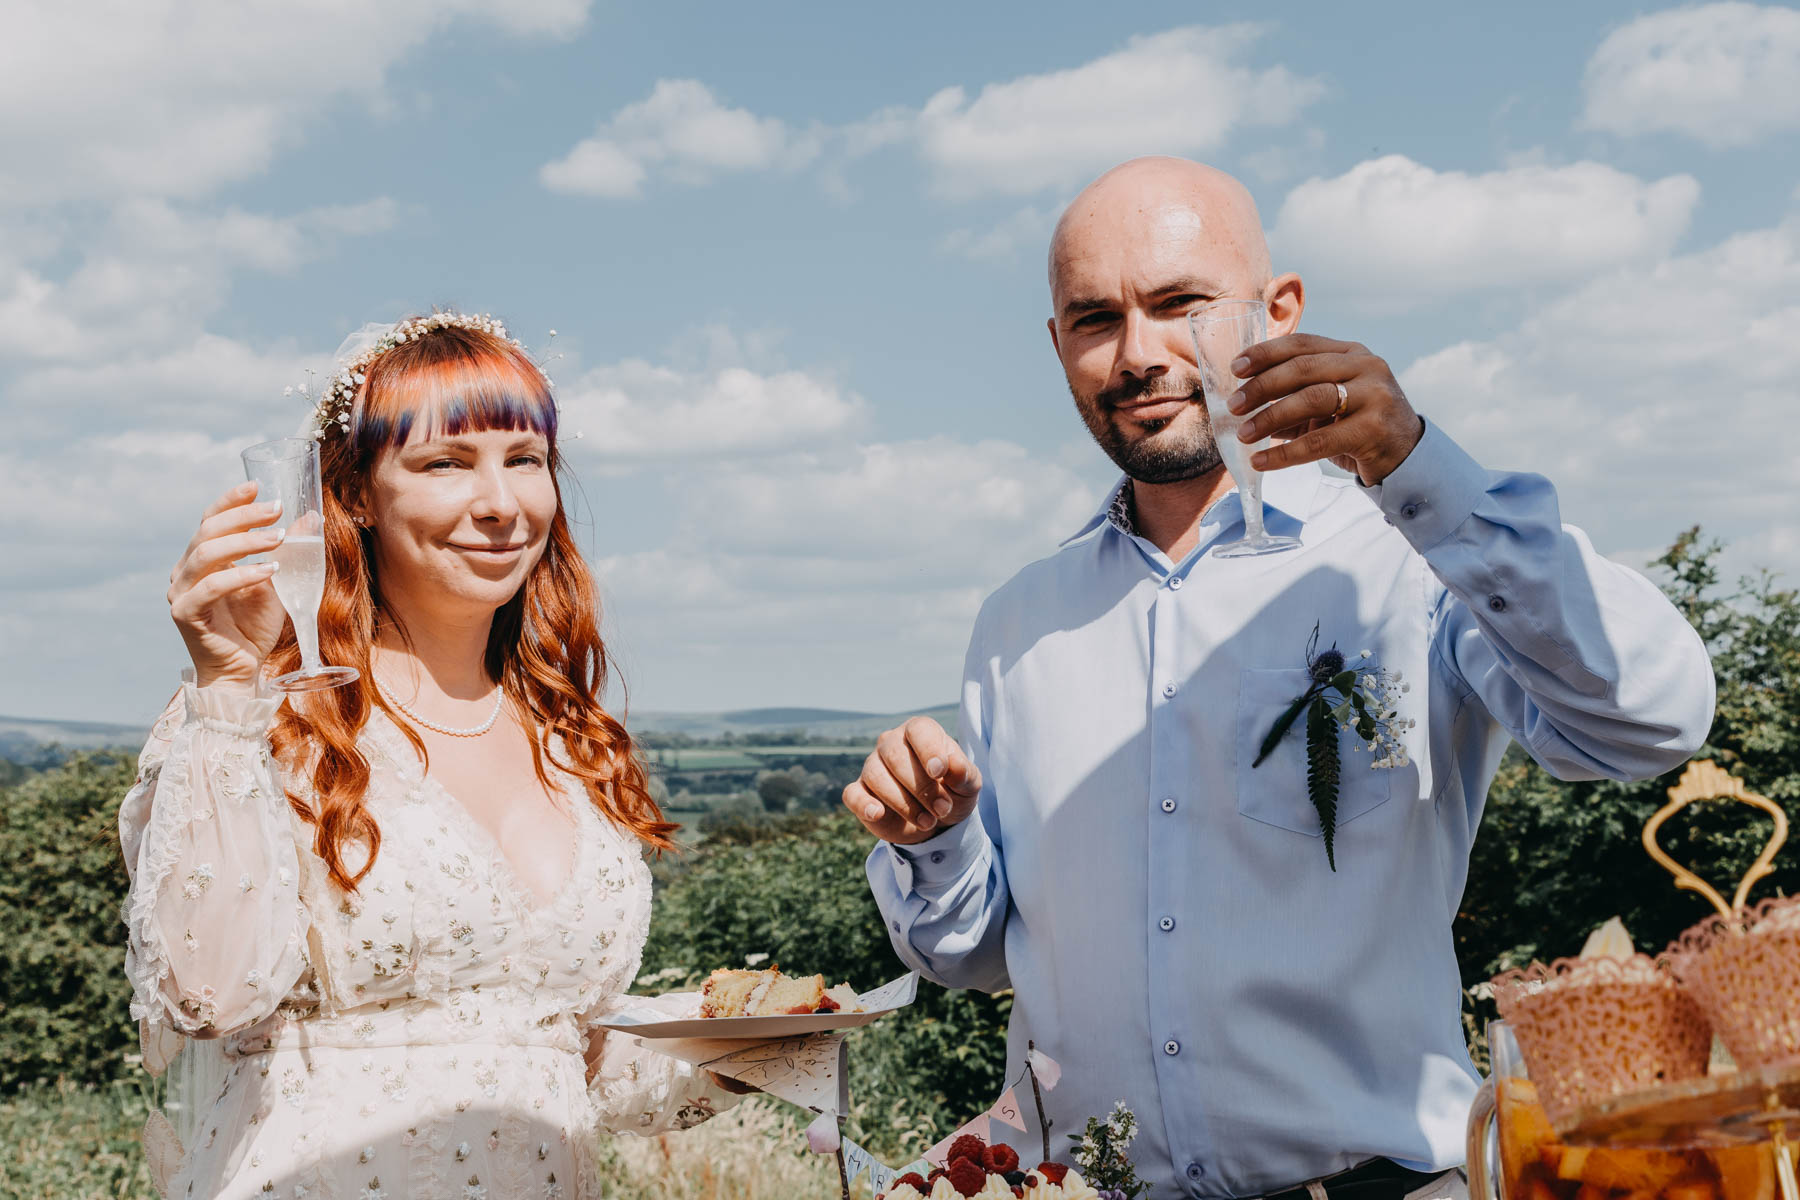 The bride and groom make a toast after the handfasting ceremony